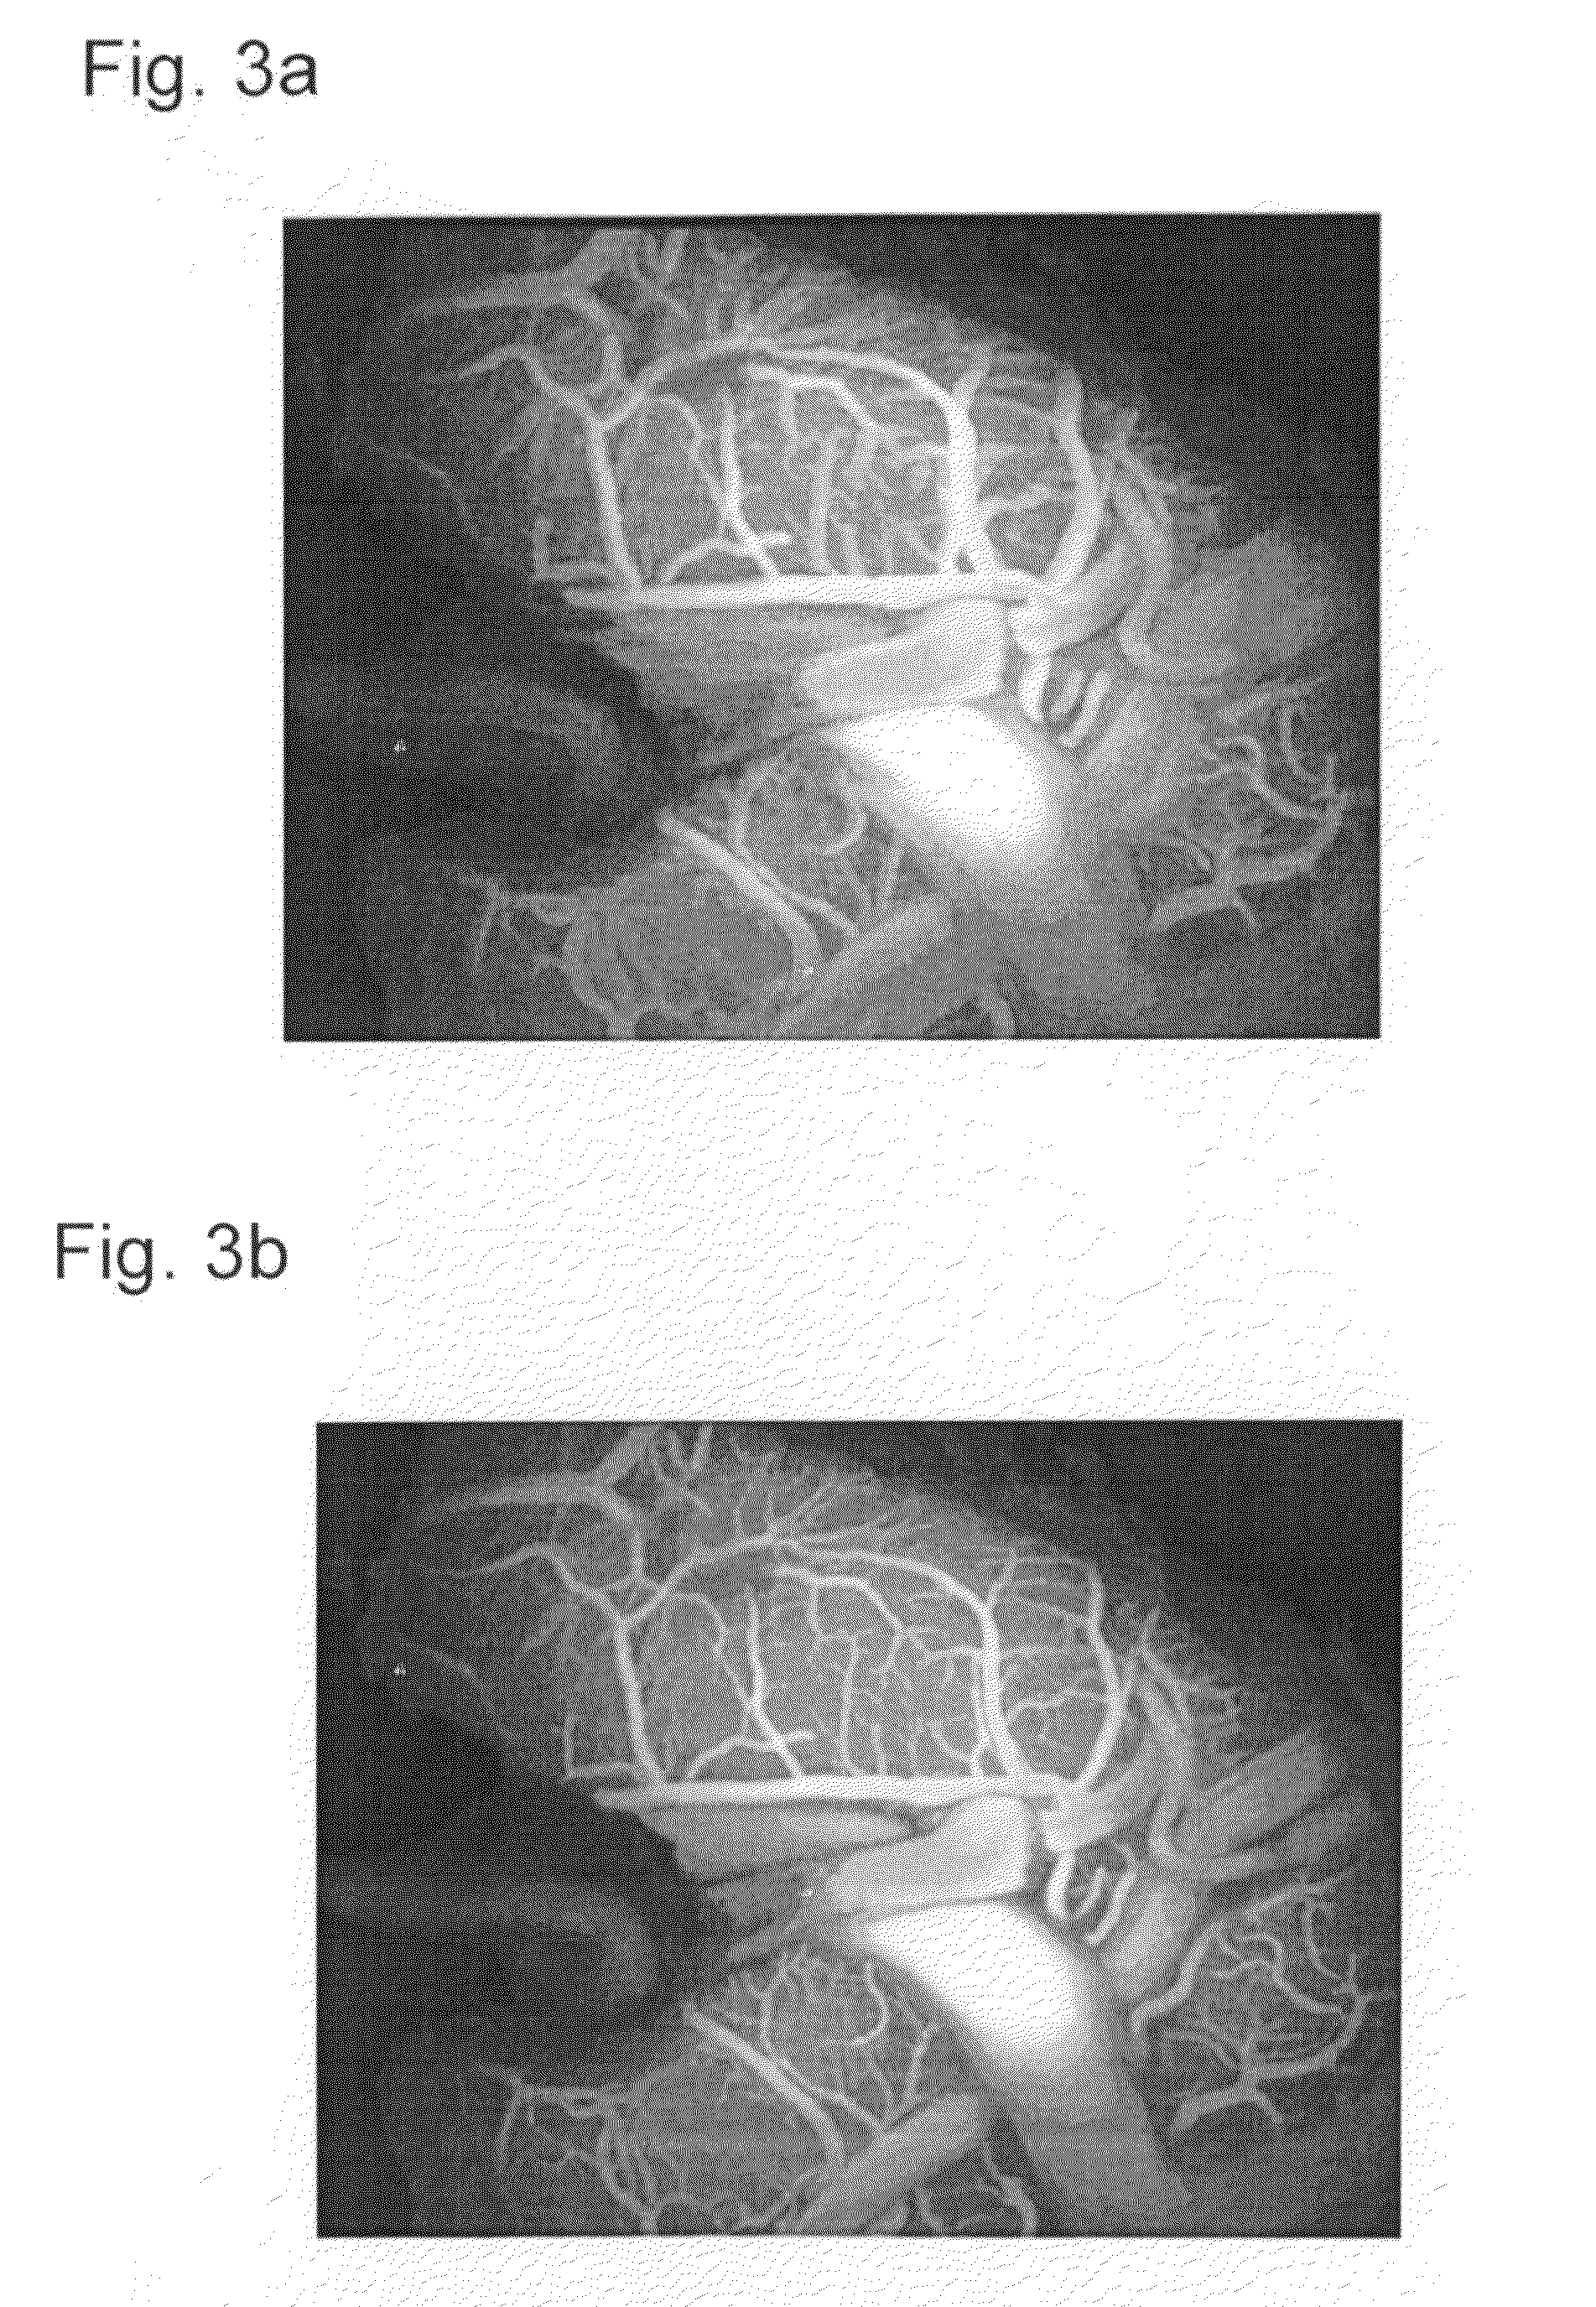 Method for the quantitative display of blood flow